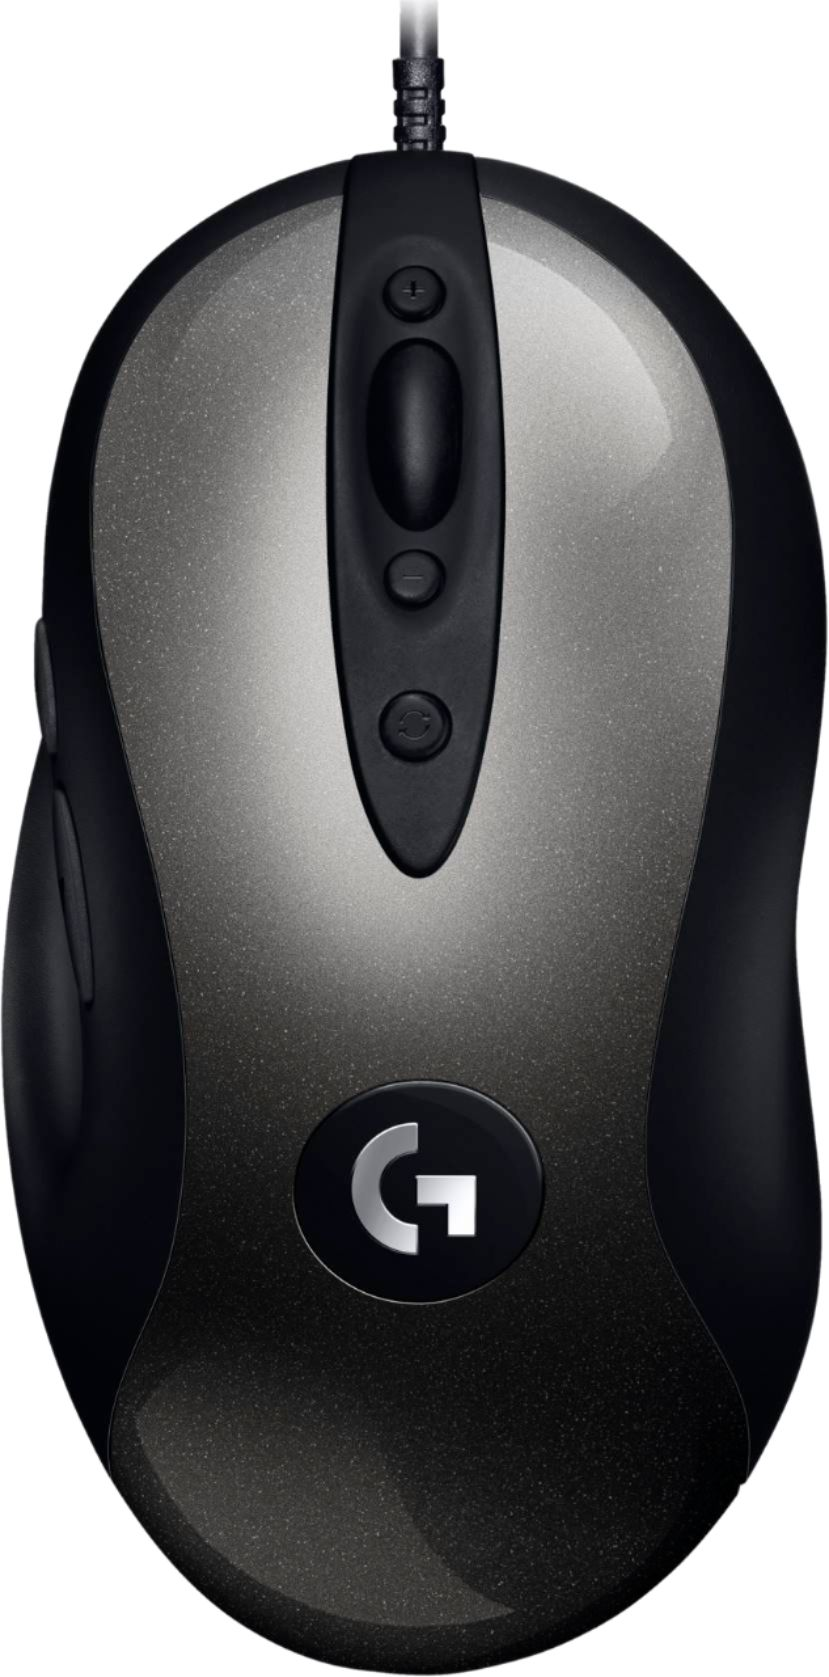 Logitech G MX518 Wired Optical Gaming Mouse Black/Gray 910-005542 - Best Buy $19.00